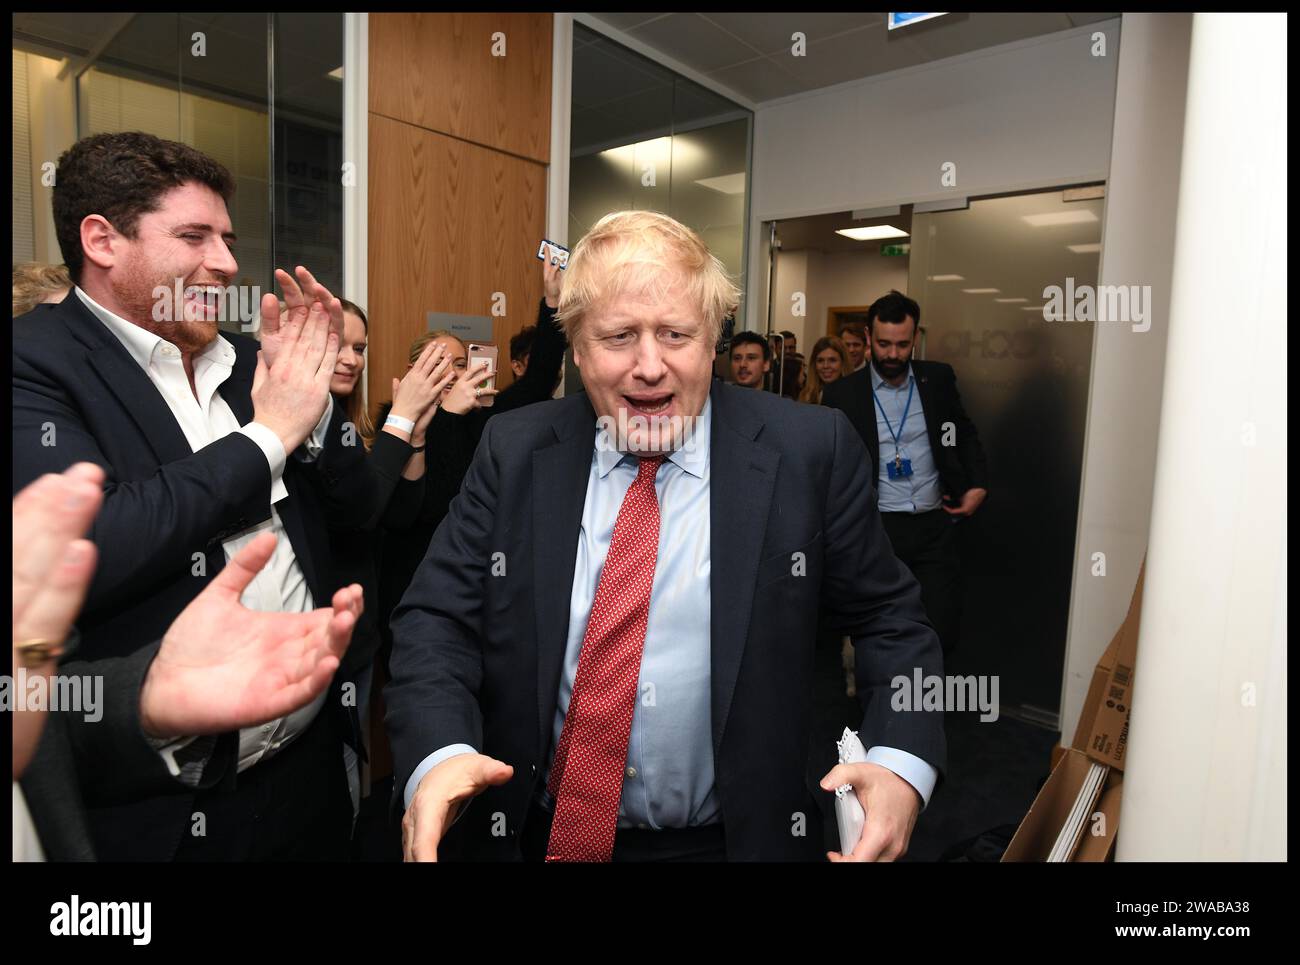 Image ©Licensed to Parsons Media. 13/12/2019. London, United Kingdom. Boris Johnson Wins 2019 General Election.   Boris Johnson Election Night.  Britain's Prime Minister Boris Johnson and his partner Carrie Symonds at Conservative Party HQ after  Boris secures a 80 seat majority in the 2019 General Election.   Picture by Andrew Parsons / Parsons Media Stock Photo